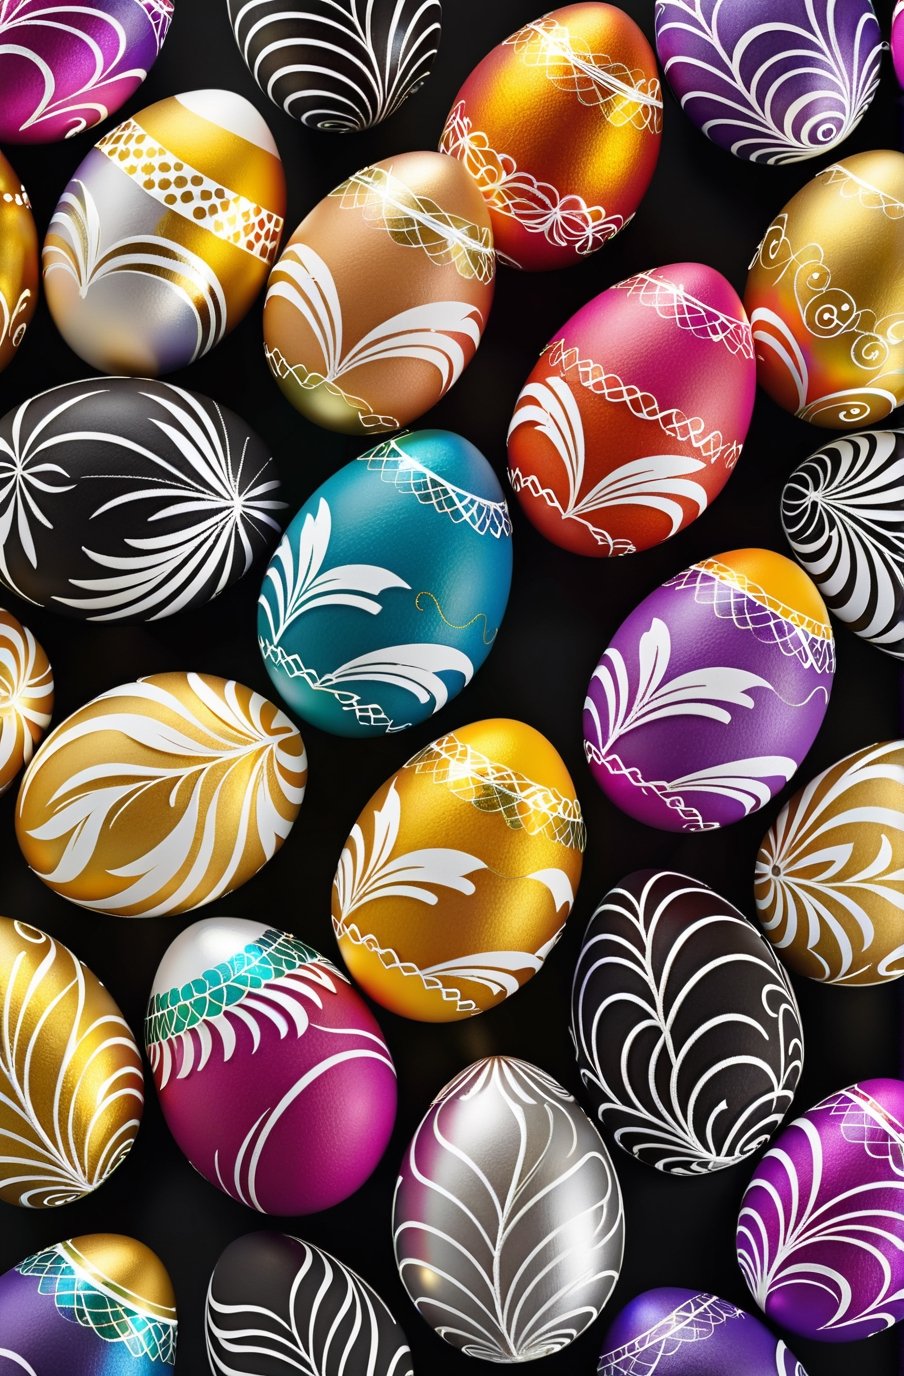 Easter eggs designed with honeysuckle and swirl patterns in a harmonious mix of rainbow colors,
Gold and silver threads are bundled together and wrapped from the bottom of the egg, as if protecting it, along with many white feathers.
The egg shines even brighter due to the intense lighting that illuminates the egg on a dark black and golden background.

Ultra-clear, Ultra-detailed, ultra-realistic, ultra-close up